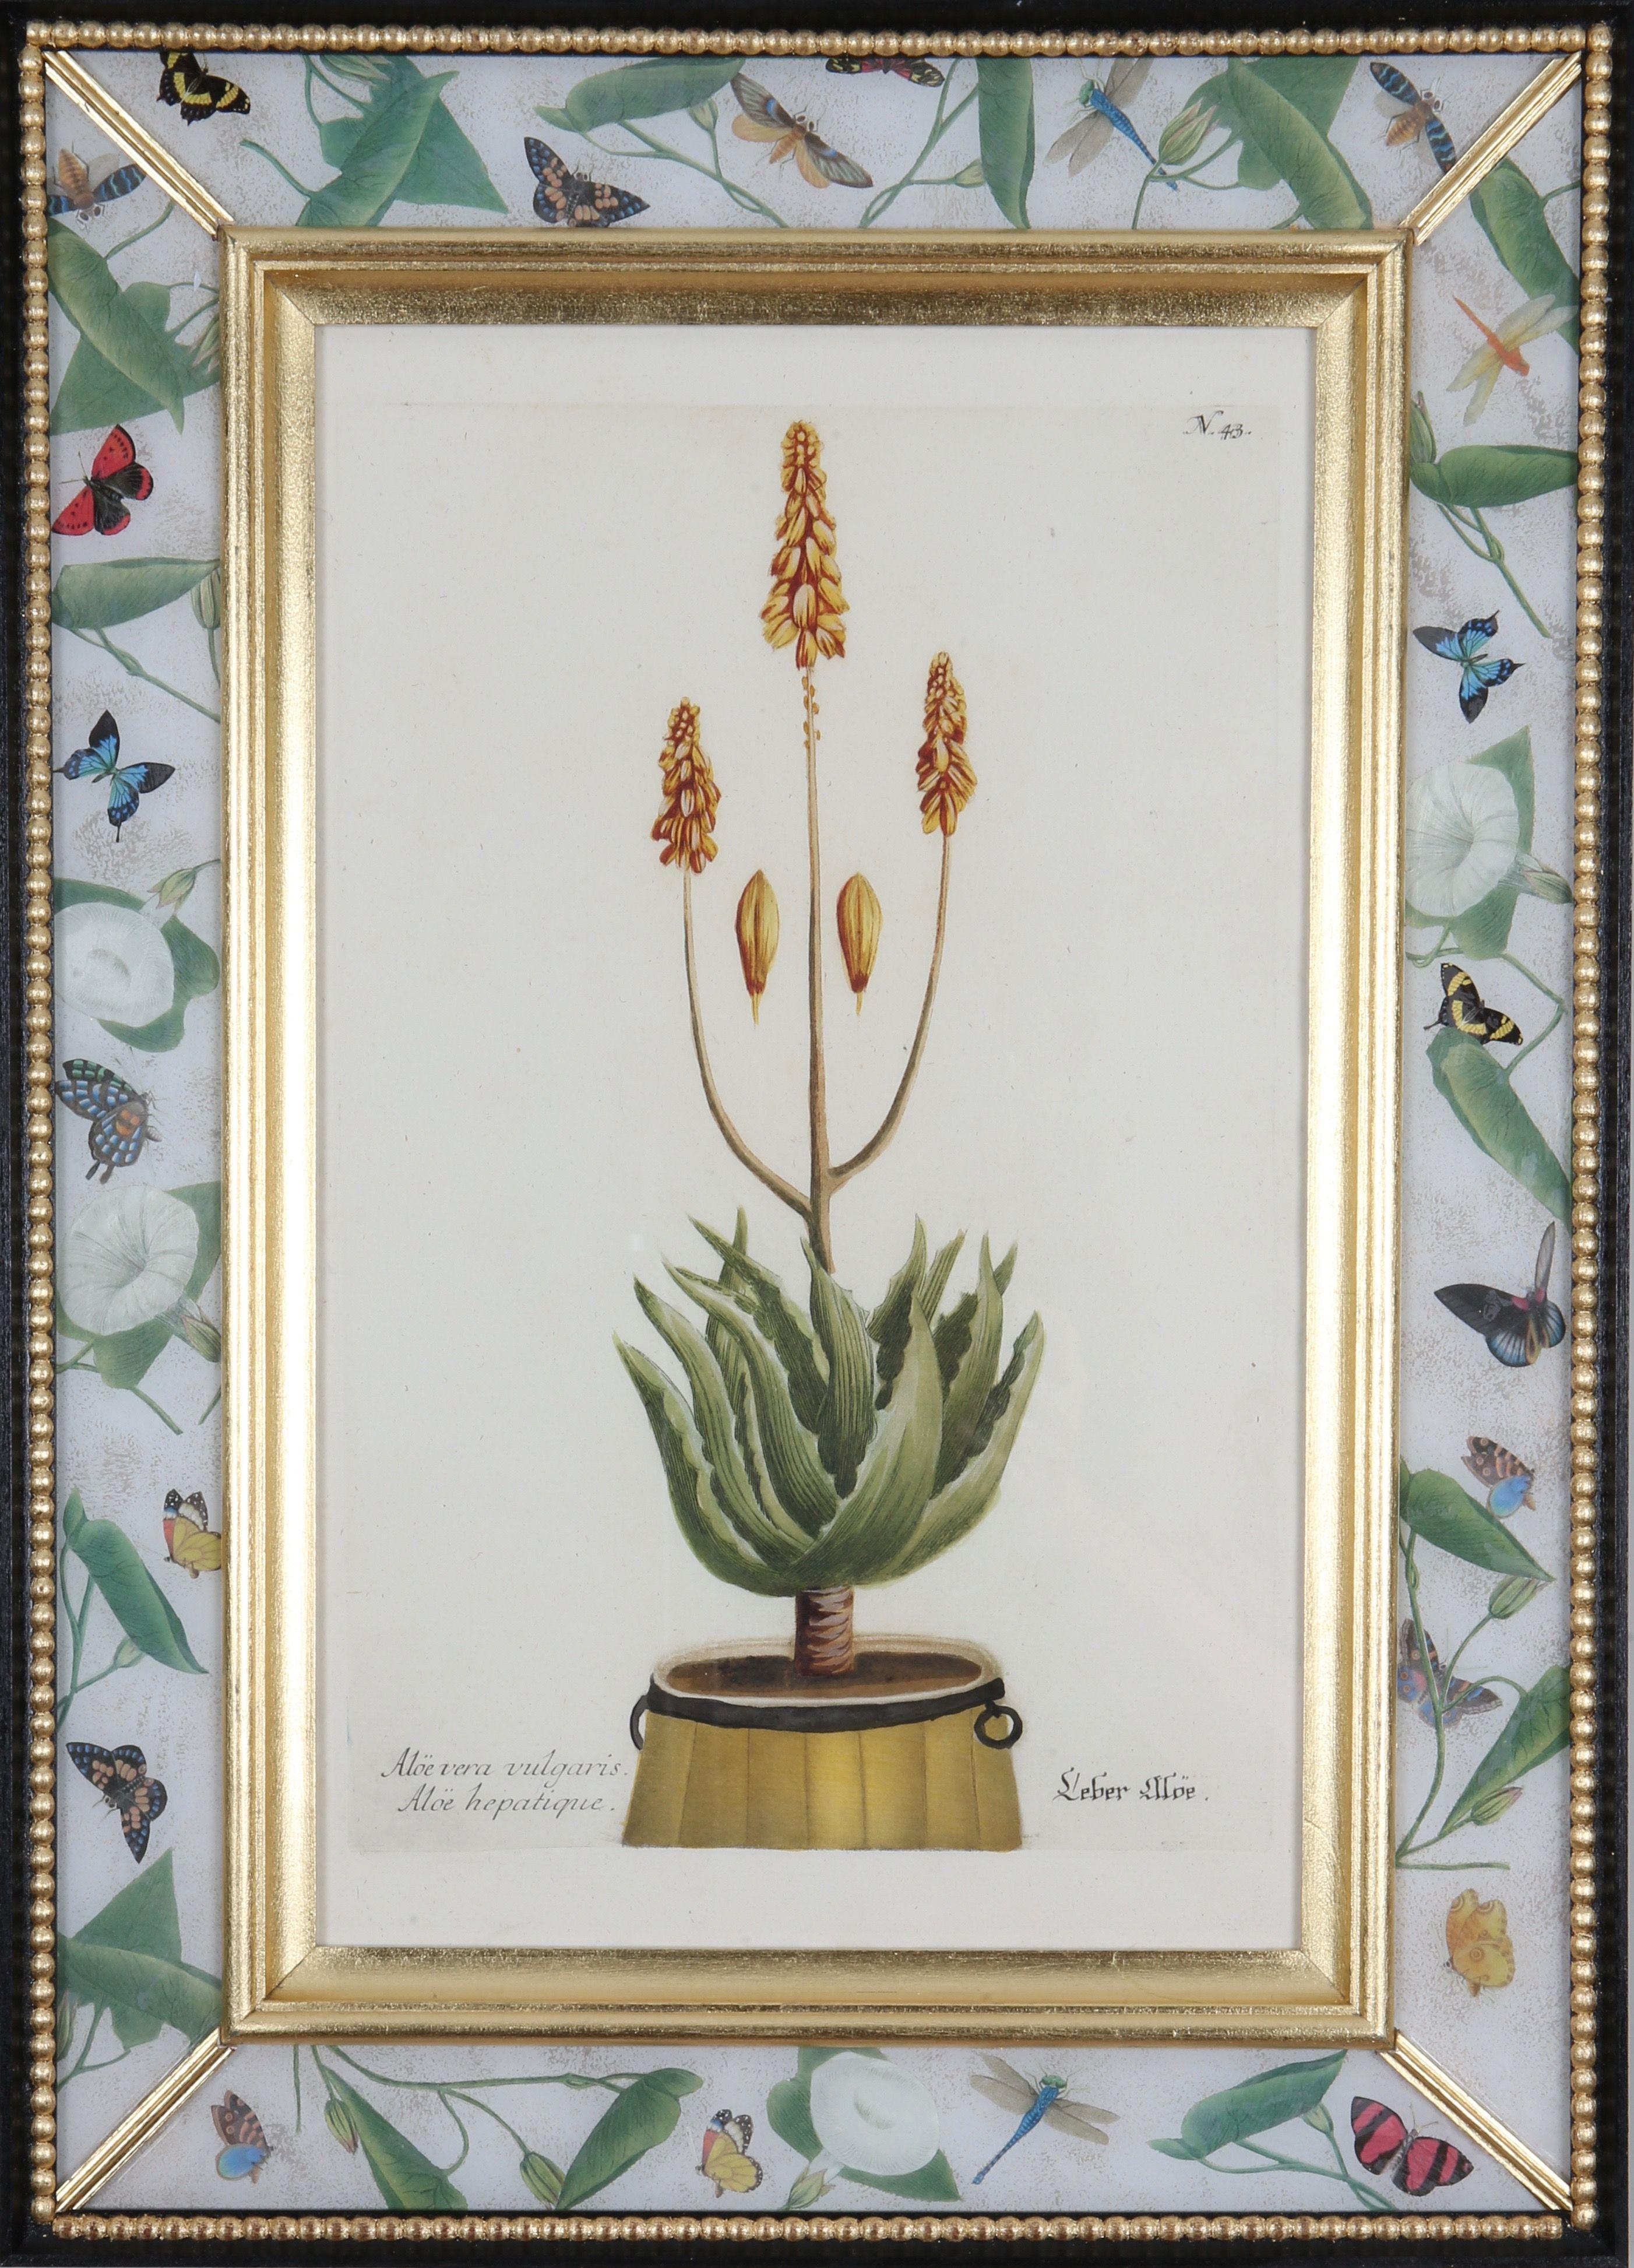 Hand-coloured mezzotint engravings of decorative urns with aloes and cacti from: ""Phytanthoza Iconographia"",  c1739, presented in hand- made, parcel-gilt, ebonised and decalcomania frames. 

Johann Weinmann (1683-1741), a German pharmacist and